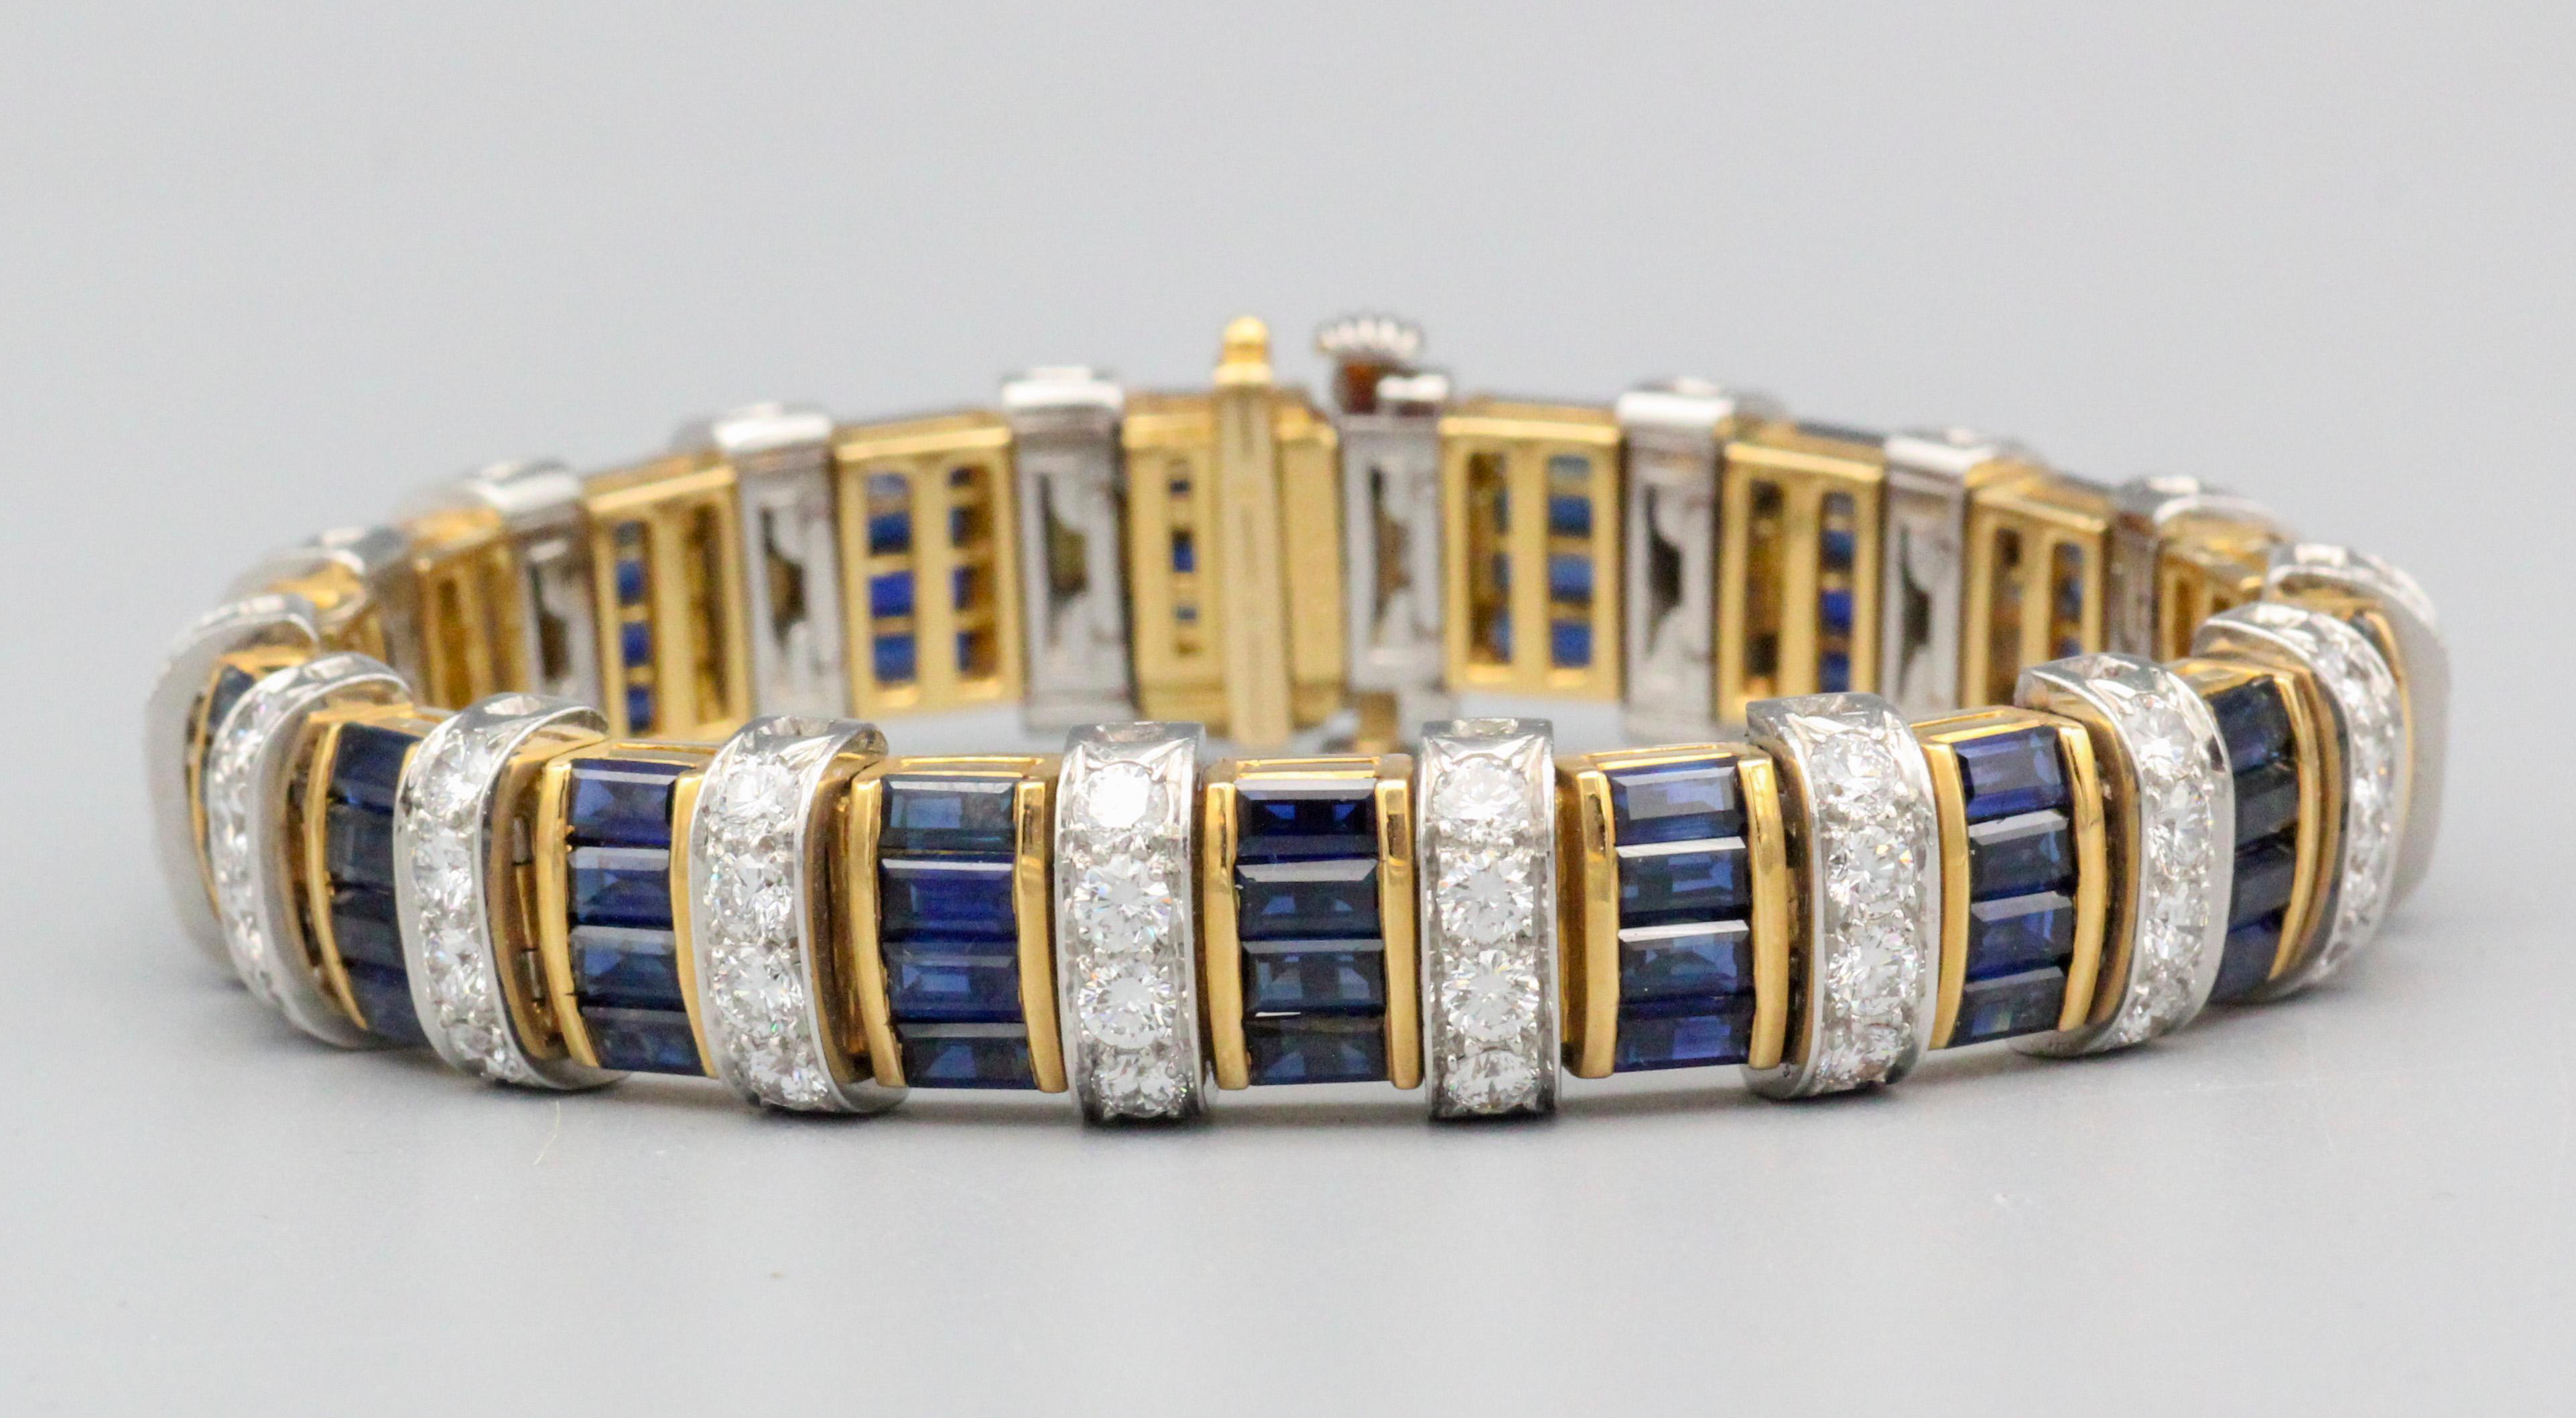 The Oscar Heyman Bros. Sapphire and Diamond 18k Gold Platinum Bracelet is a testament to the brand's legacy of exceptional craftsmanship and timeless design. 

The bracelet features a captivating design that showcases a combination of baguette-cut